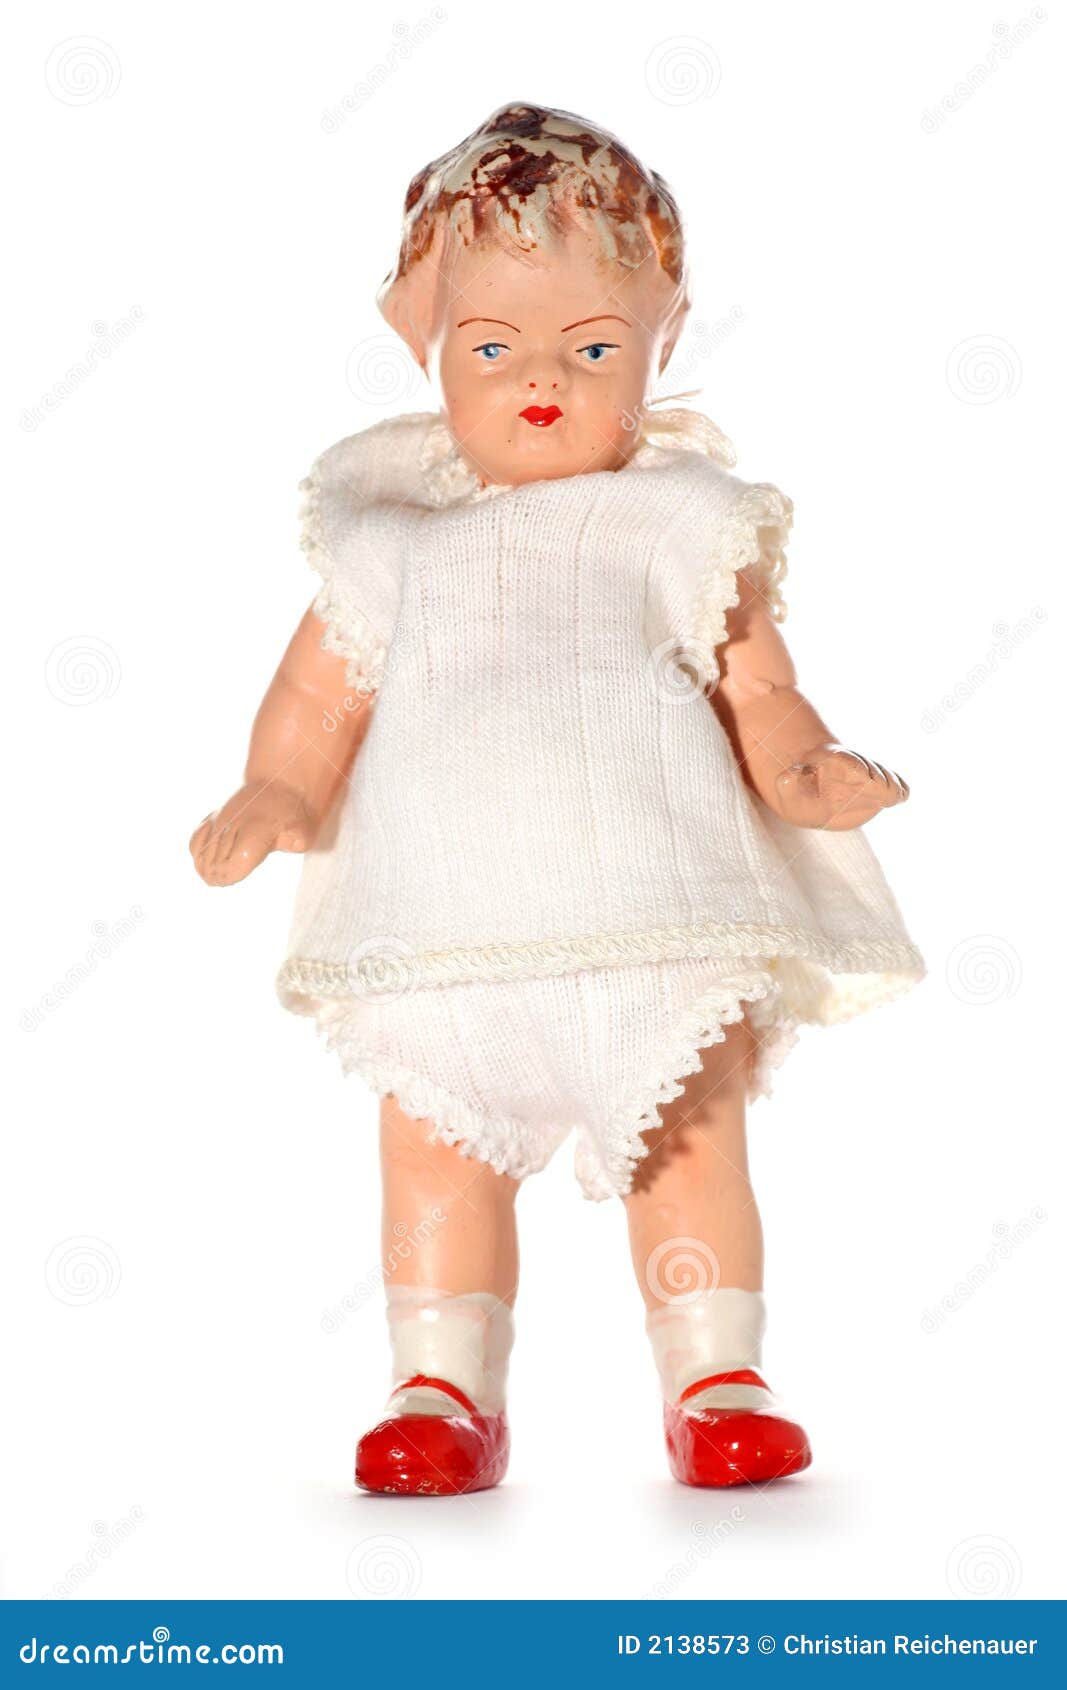 old abused child doll